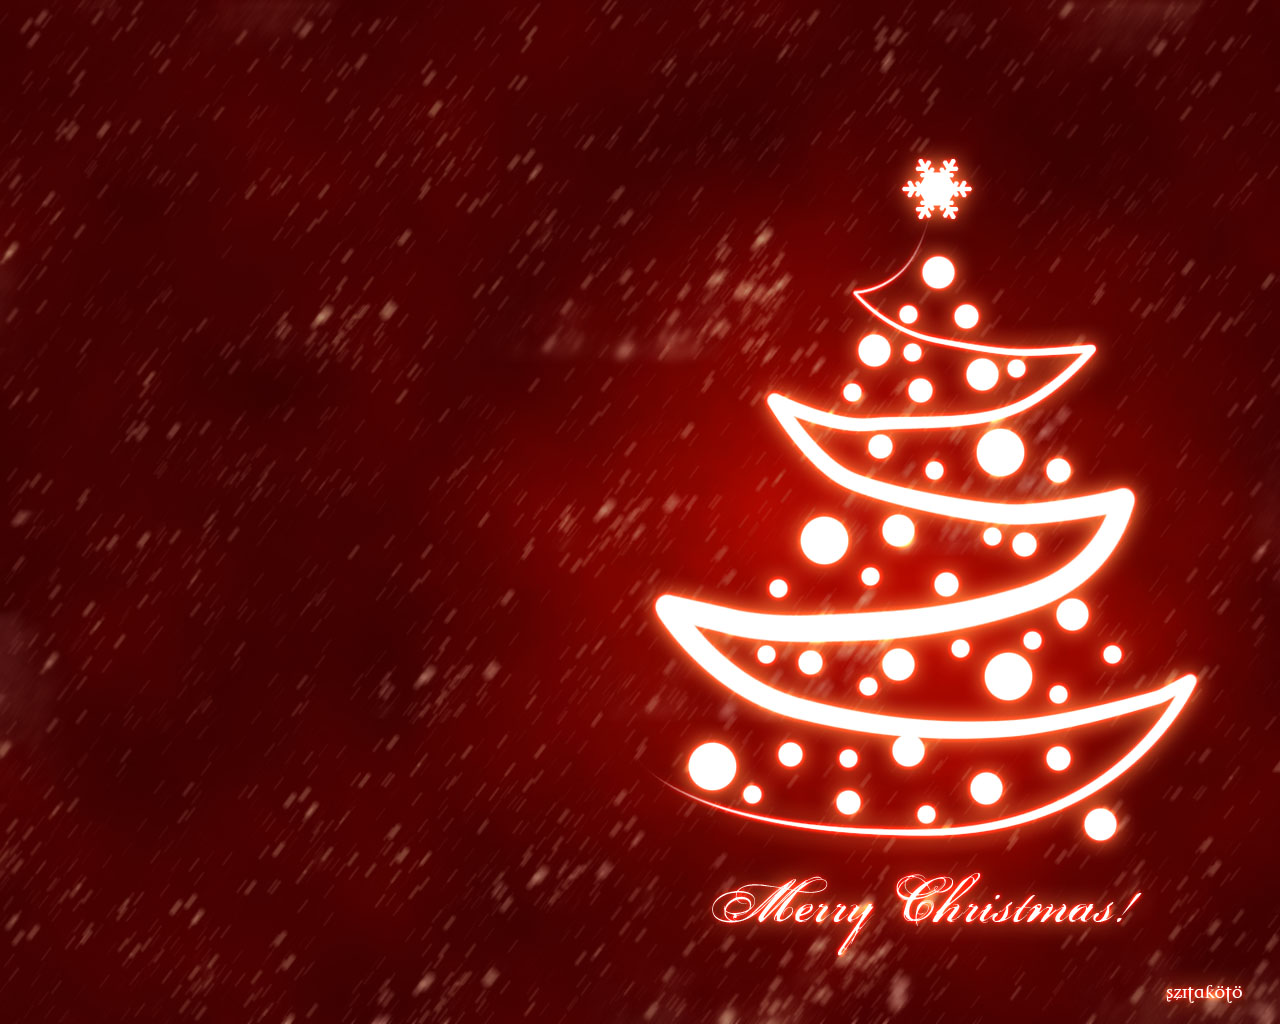 Merry Christmas Background Wallpaper HD In